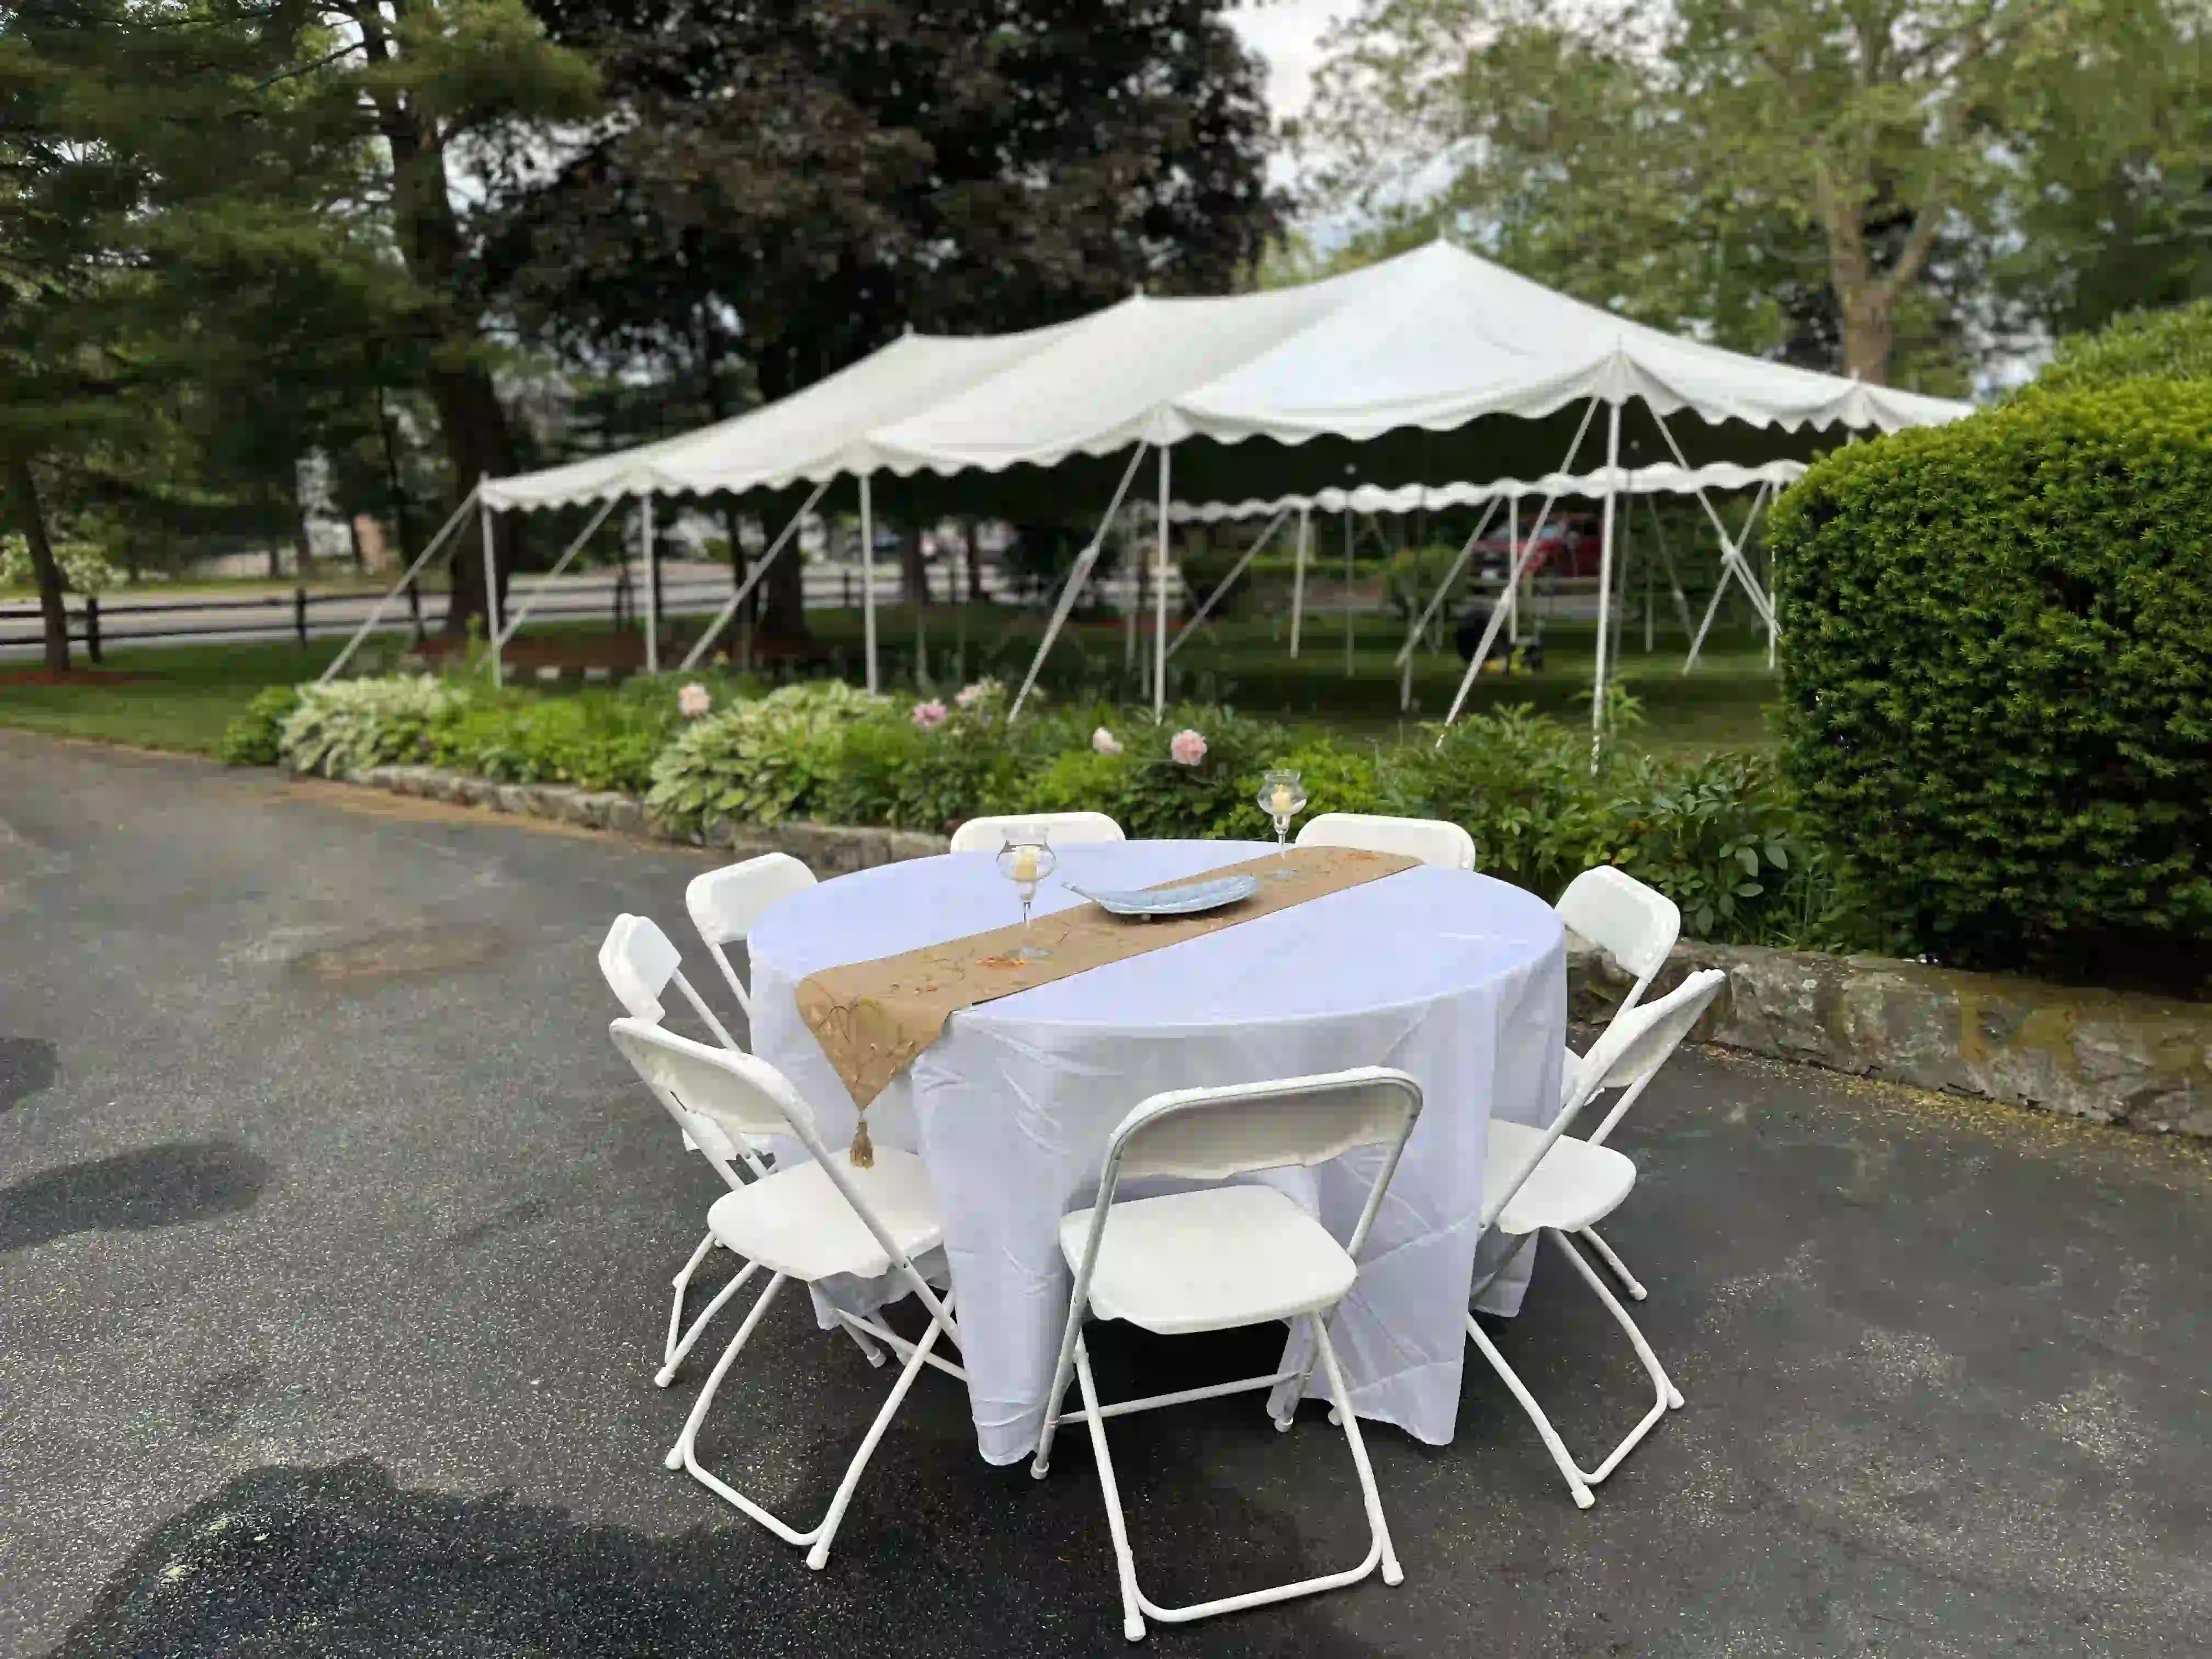 Elegant white foldable chairs arranged for an event, providing stylish and comfortable seating for guests